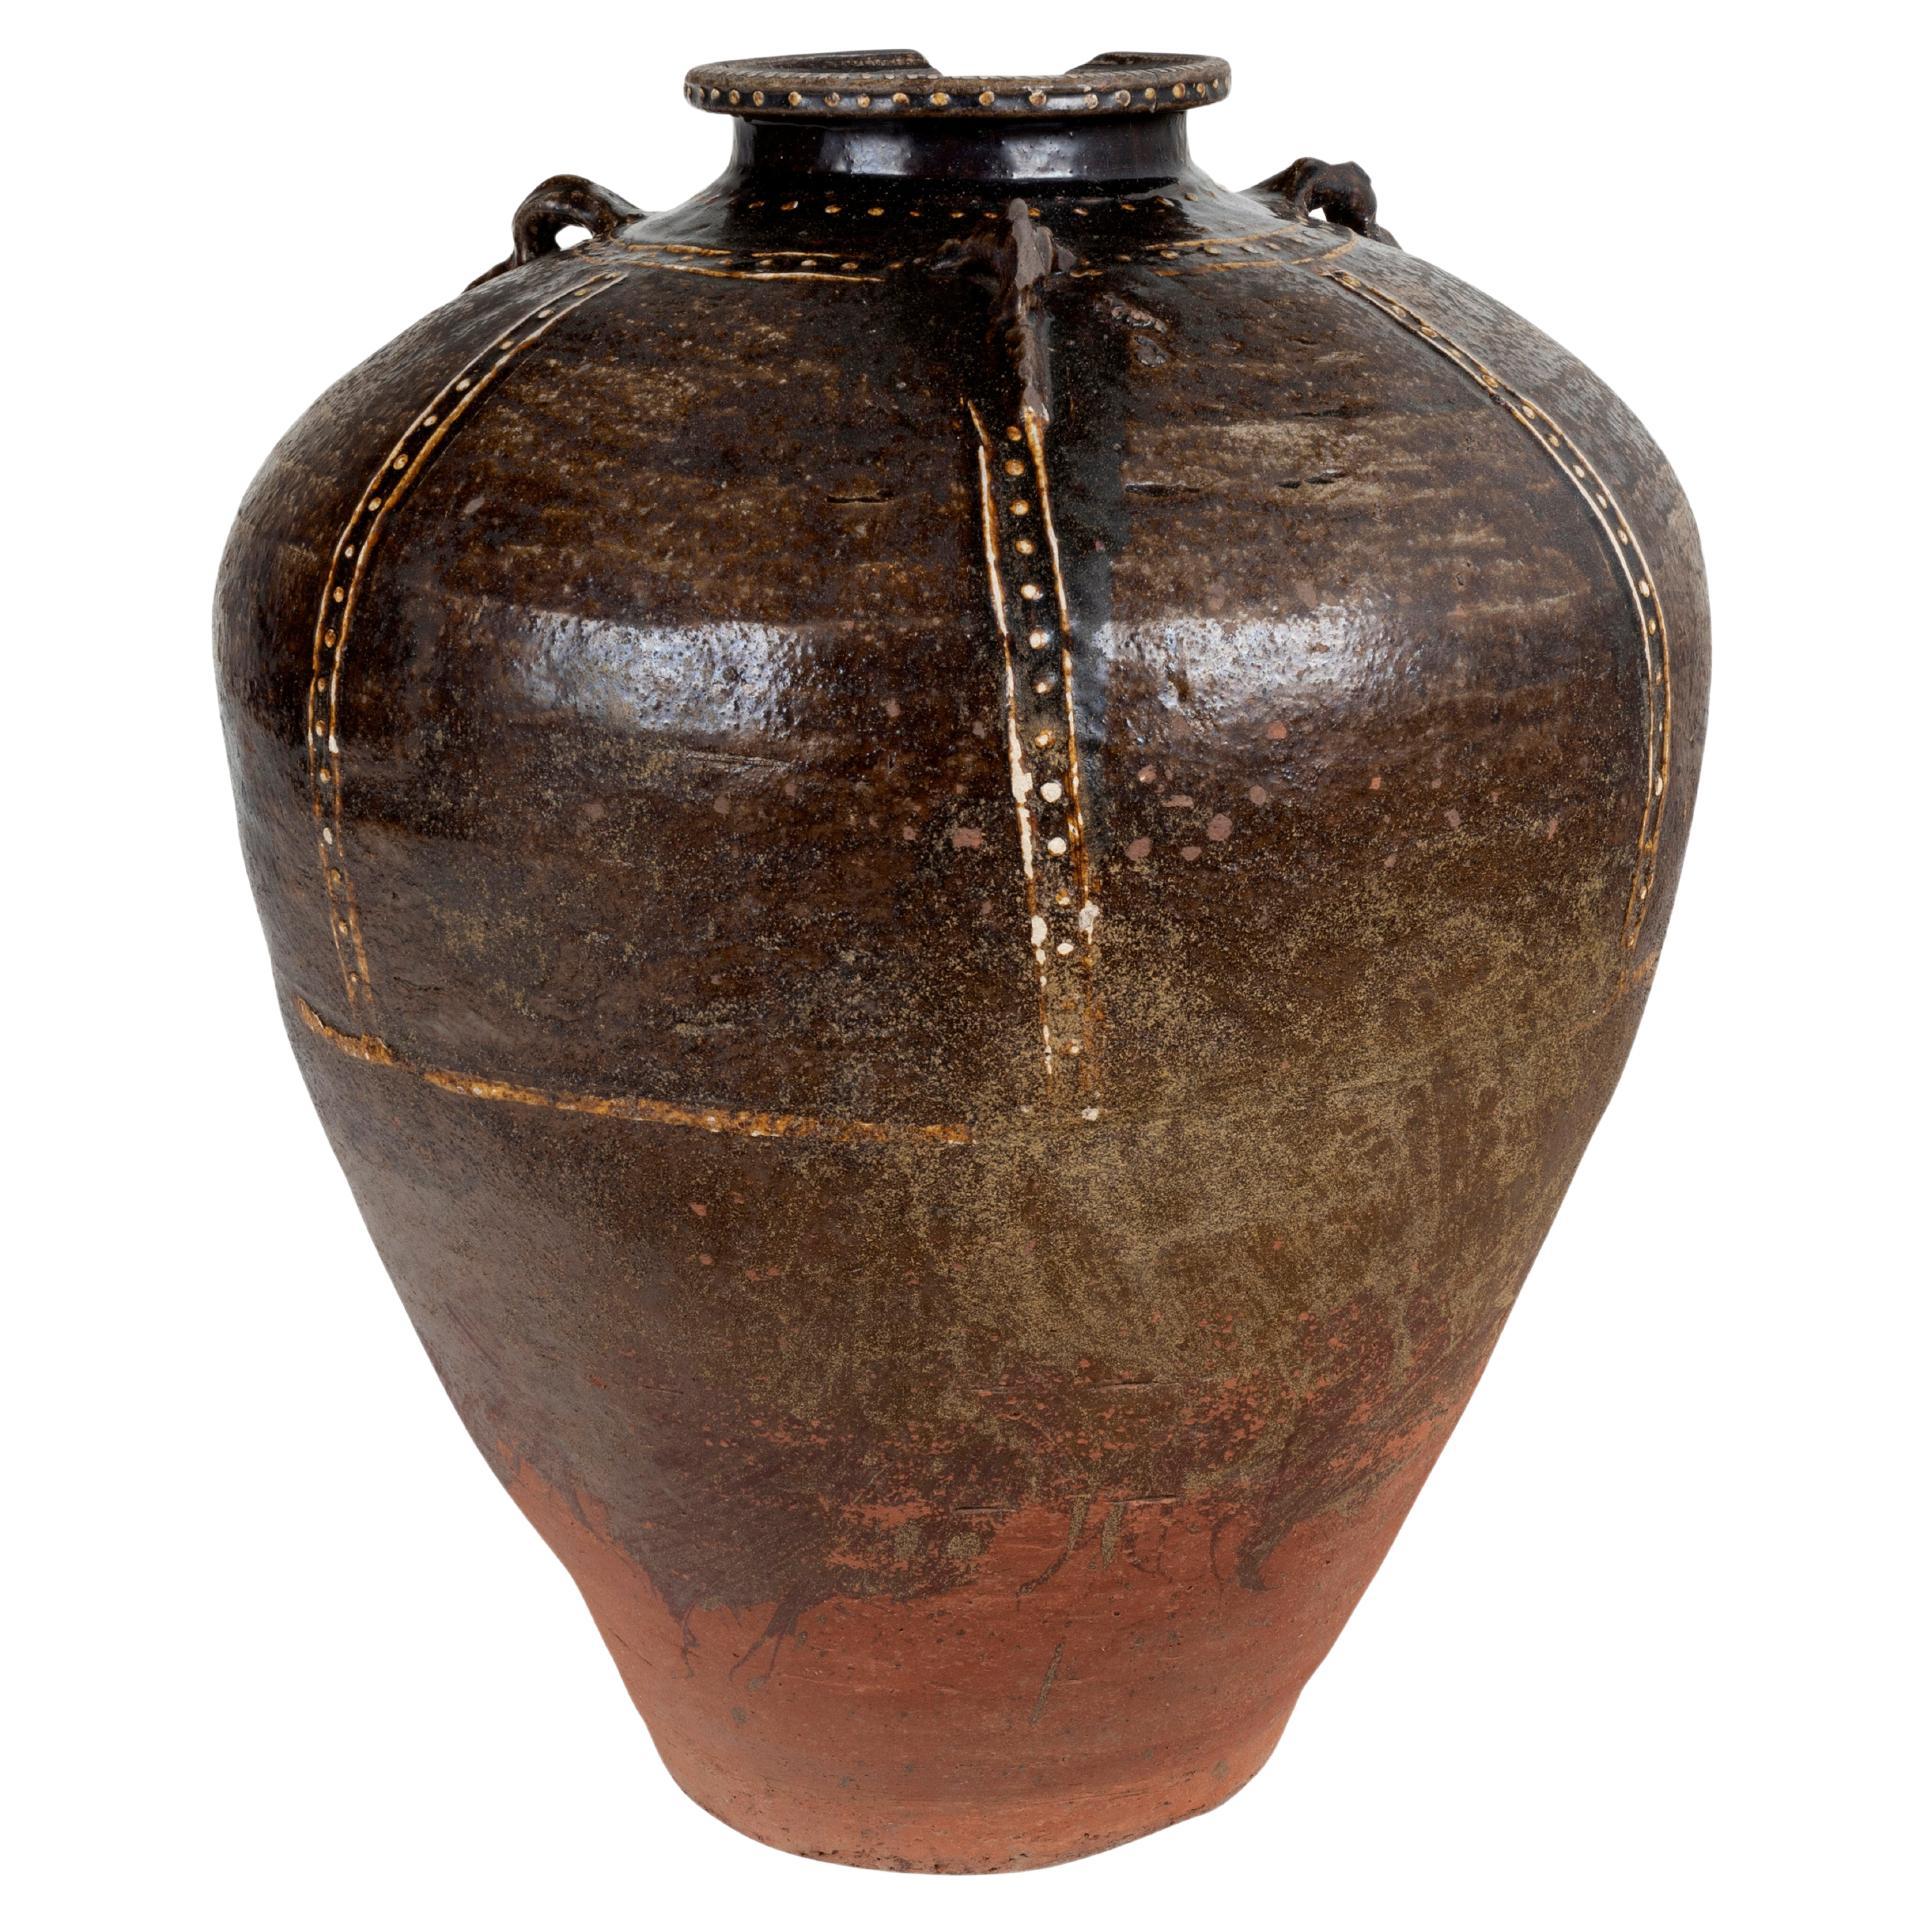 Monumental Cracked Chinese Oil Jar with Repairs 